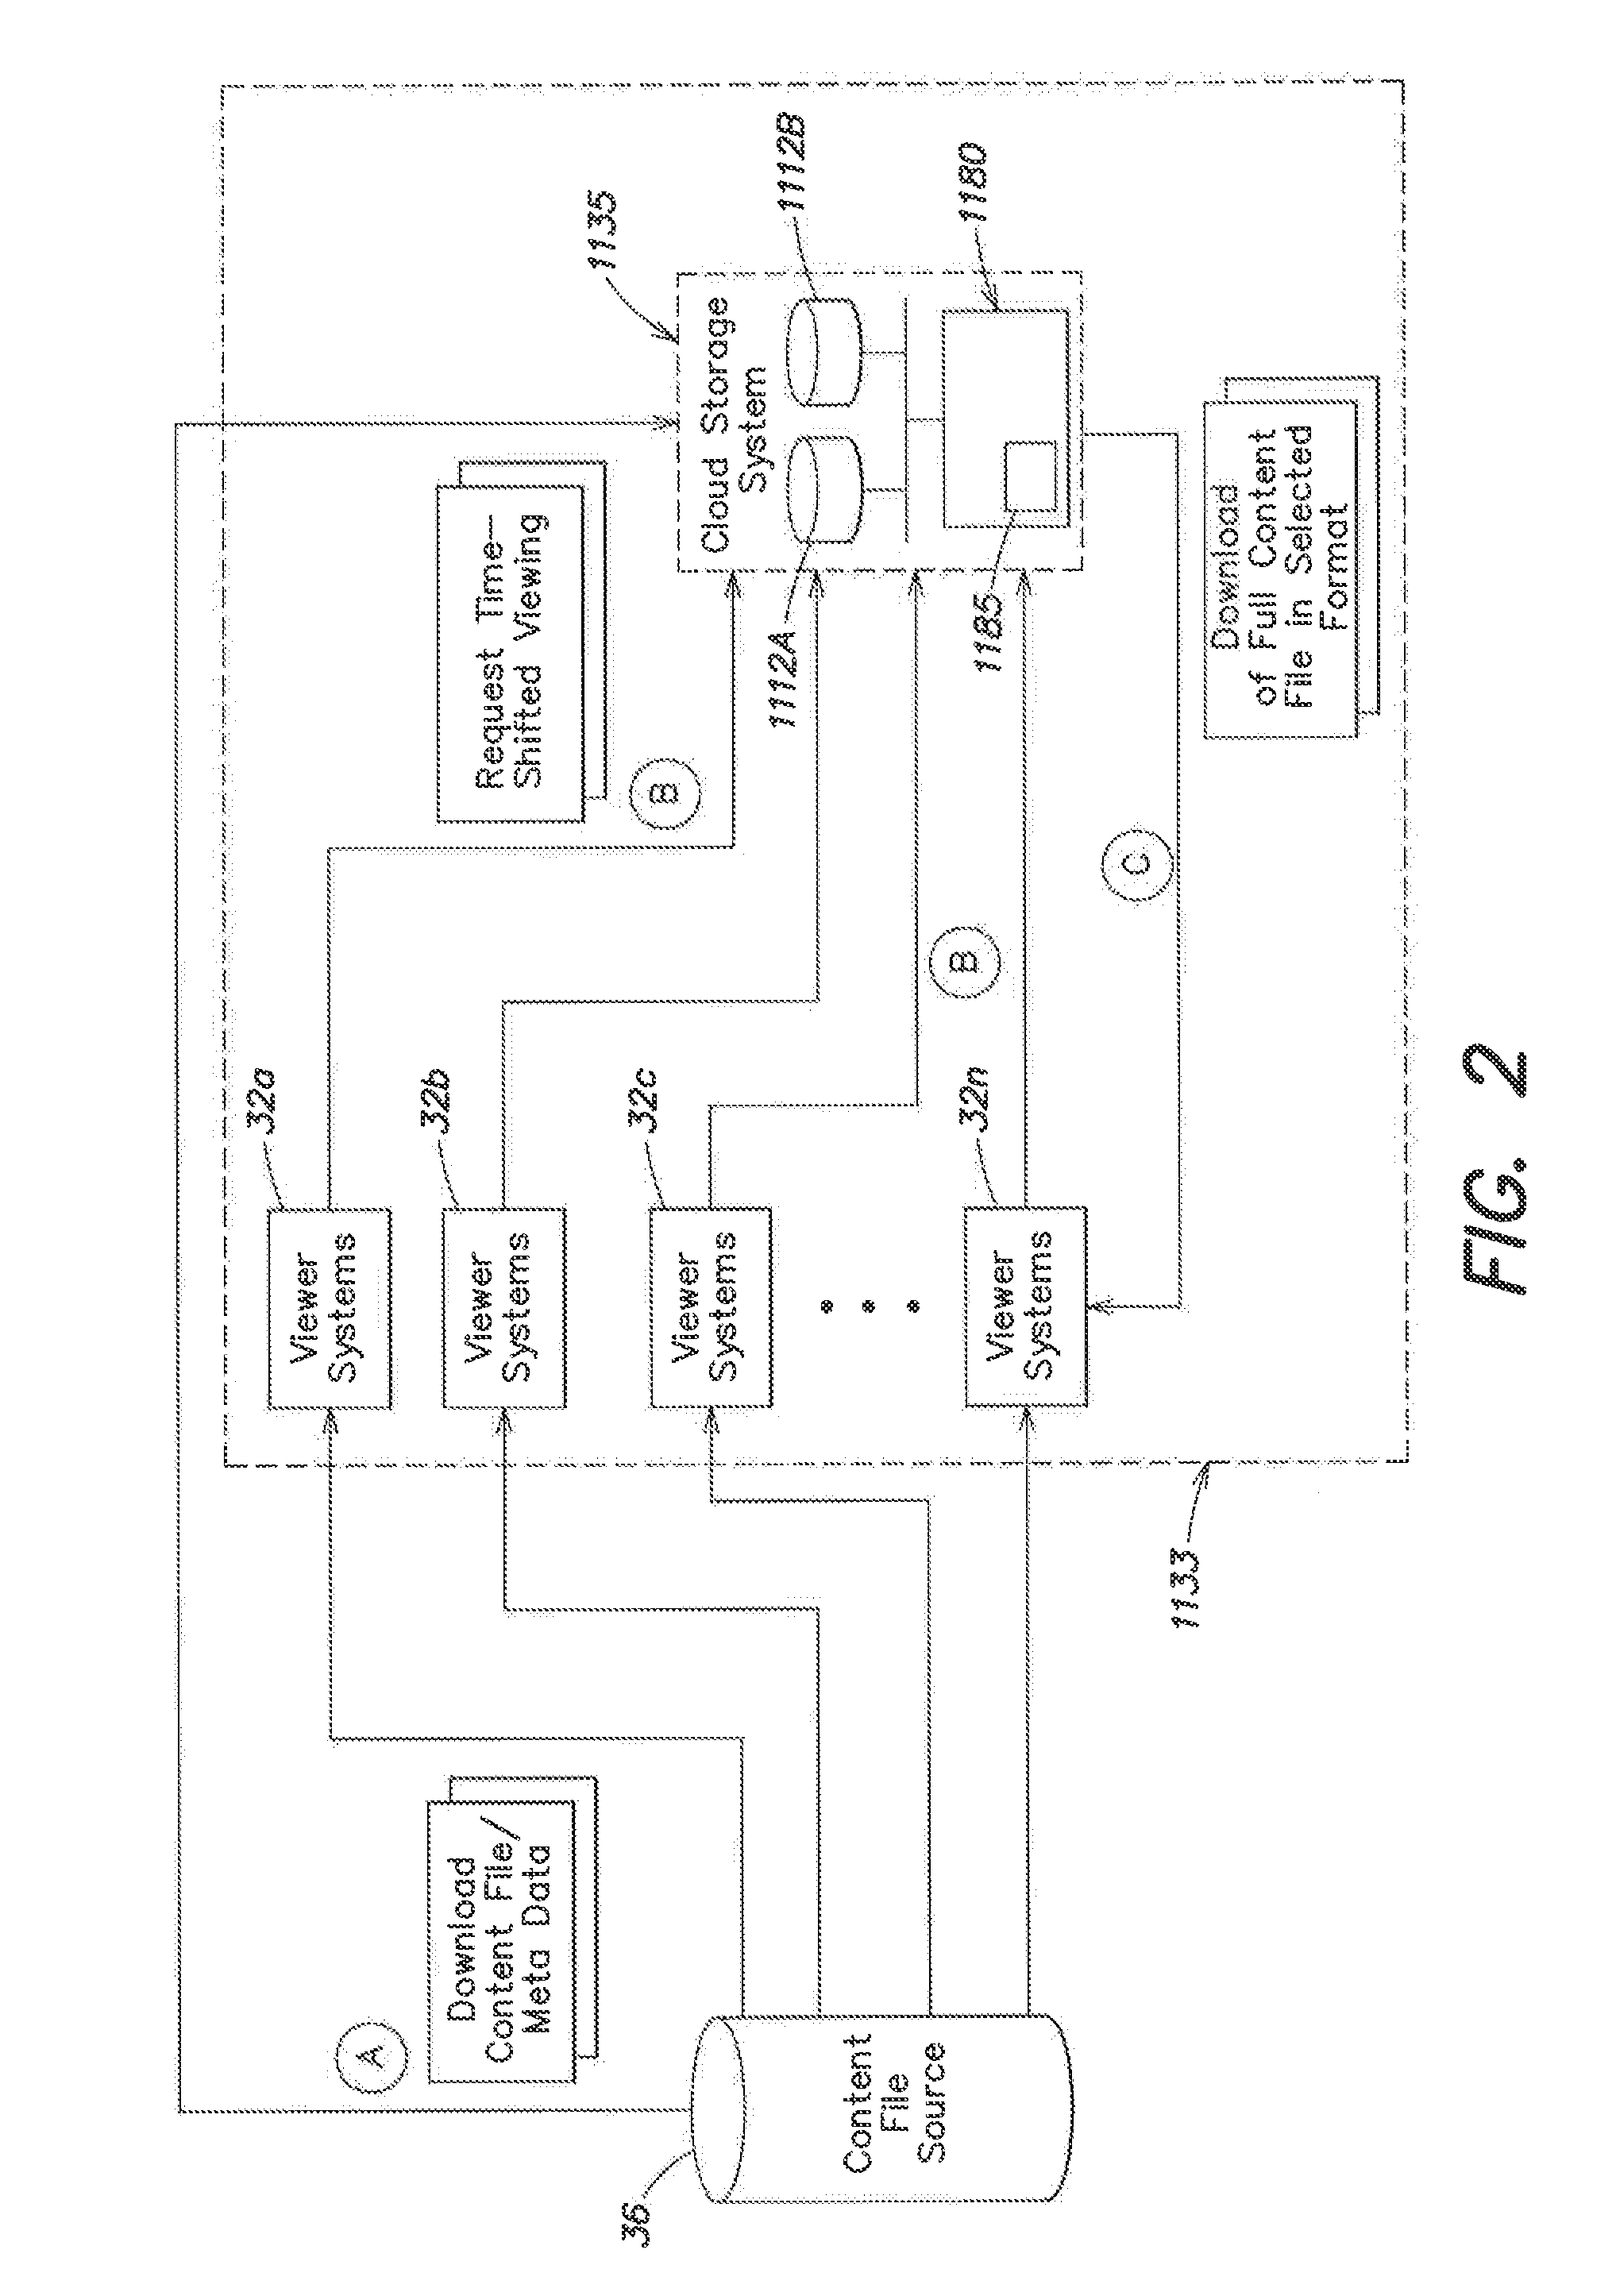 Method and system for collaborative broadcast and timeshifted viewing